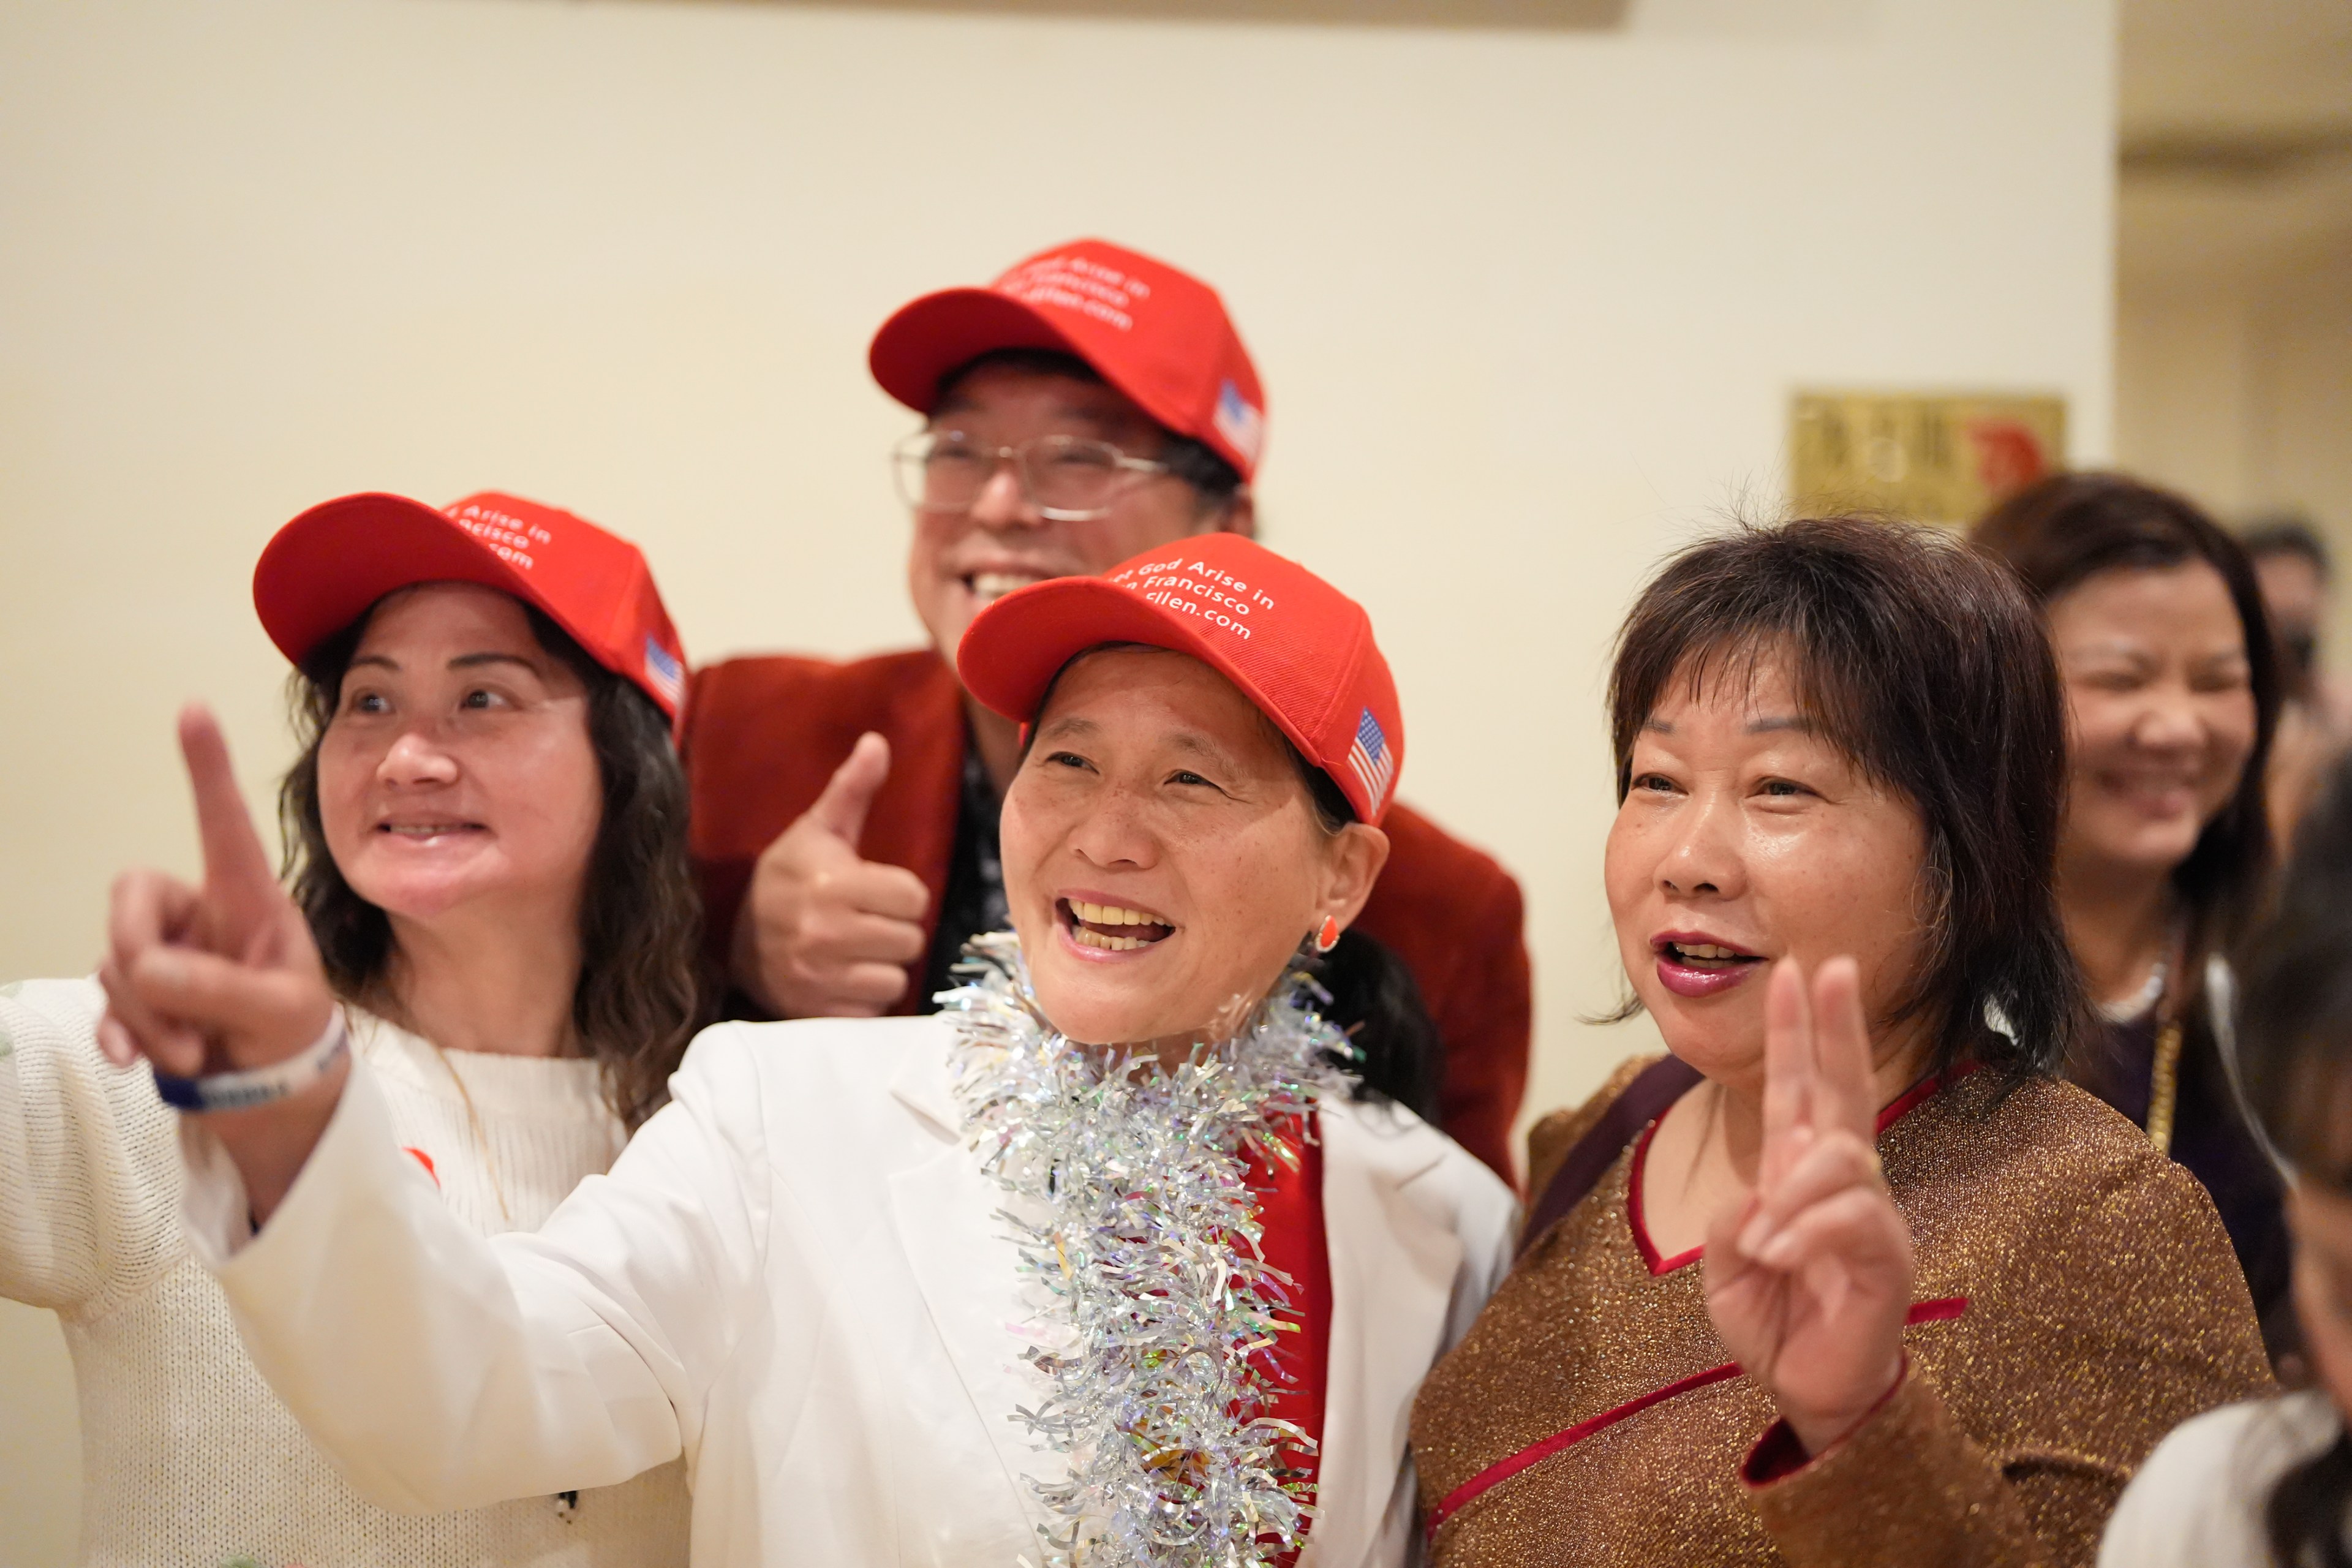 A group of joyous people, some wearing red caps, is gesturing with thumbs up and peace signs.